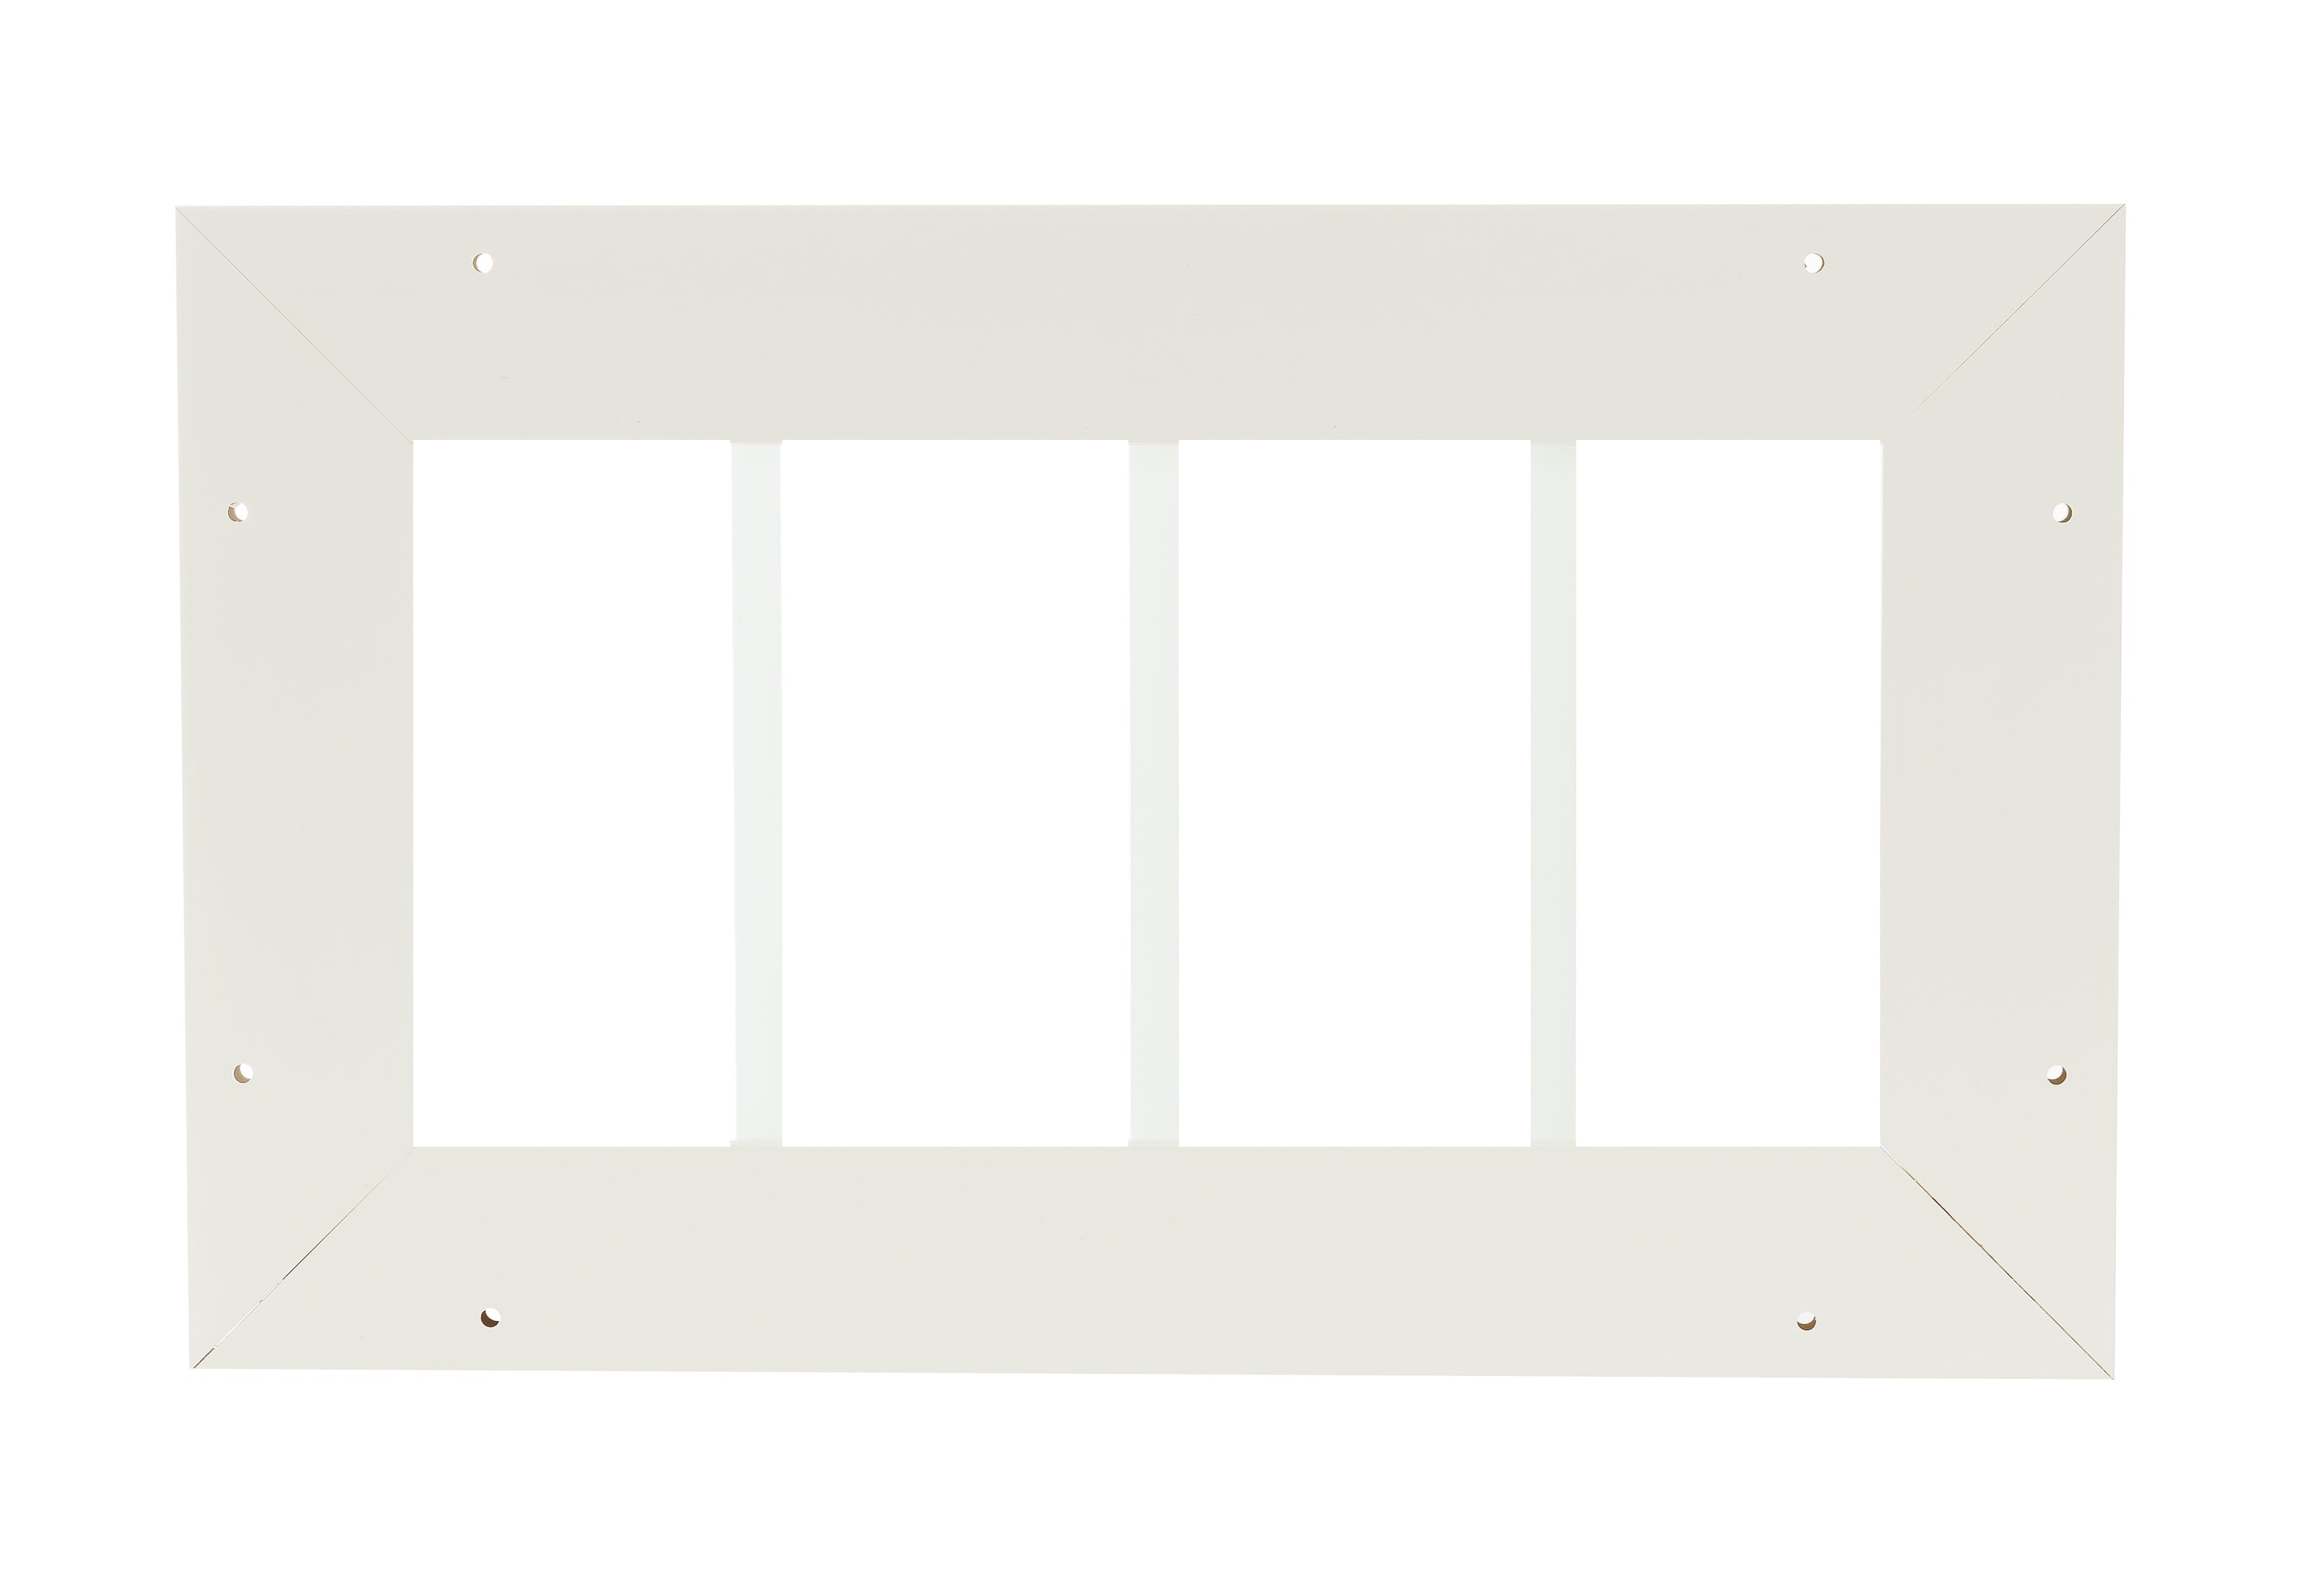 10.185" X 23" Transom Flush Mount PVC White Window for Sheds, Playhouses, and MORE 